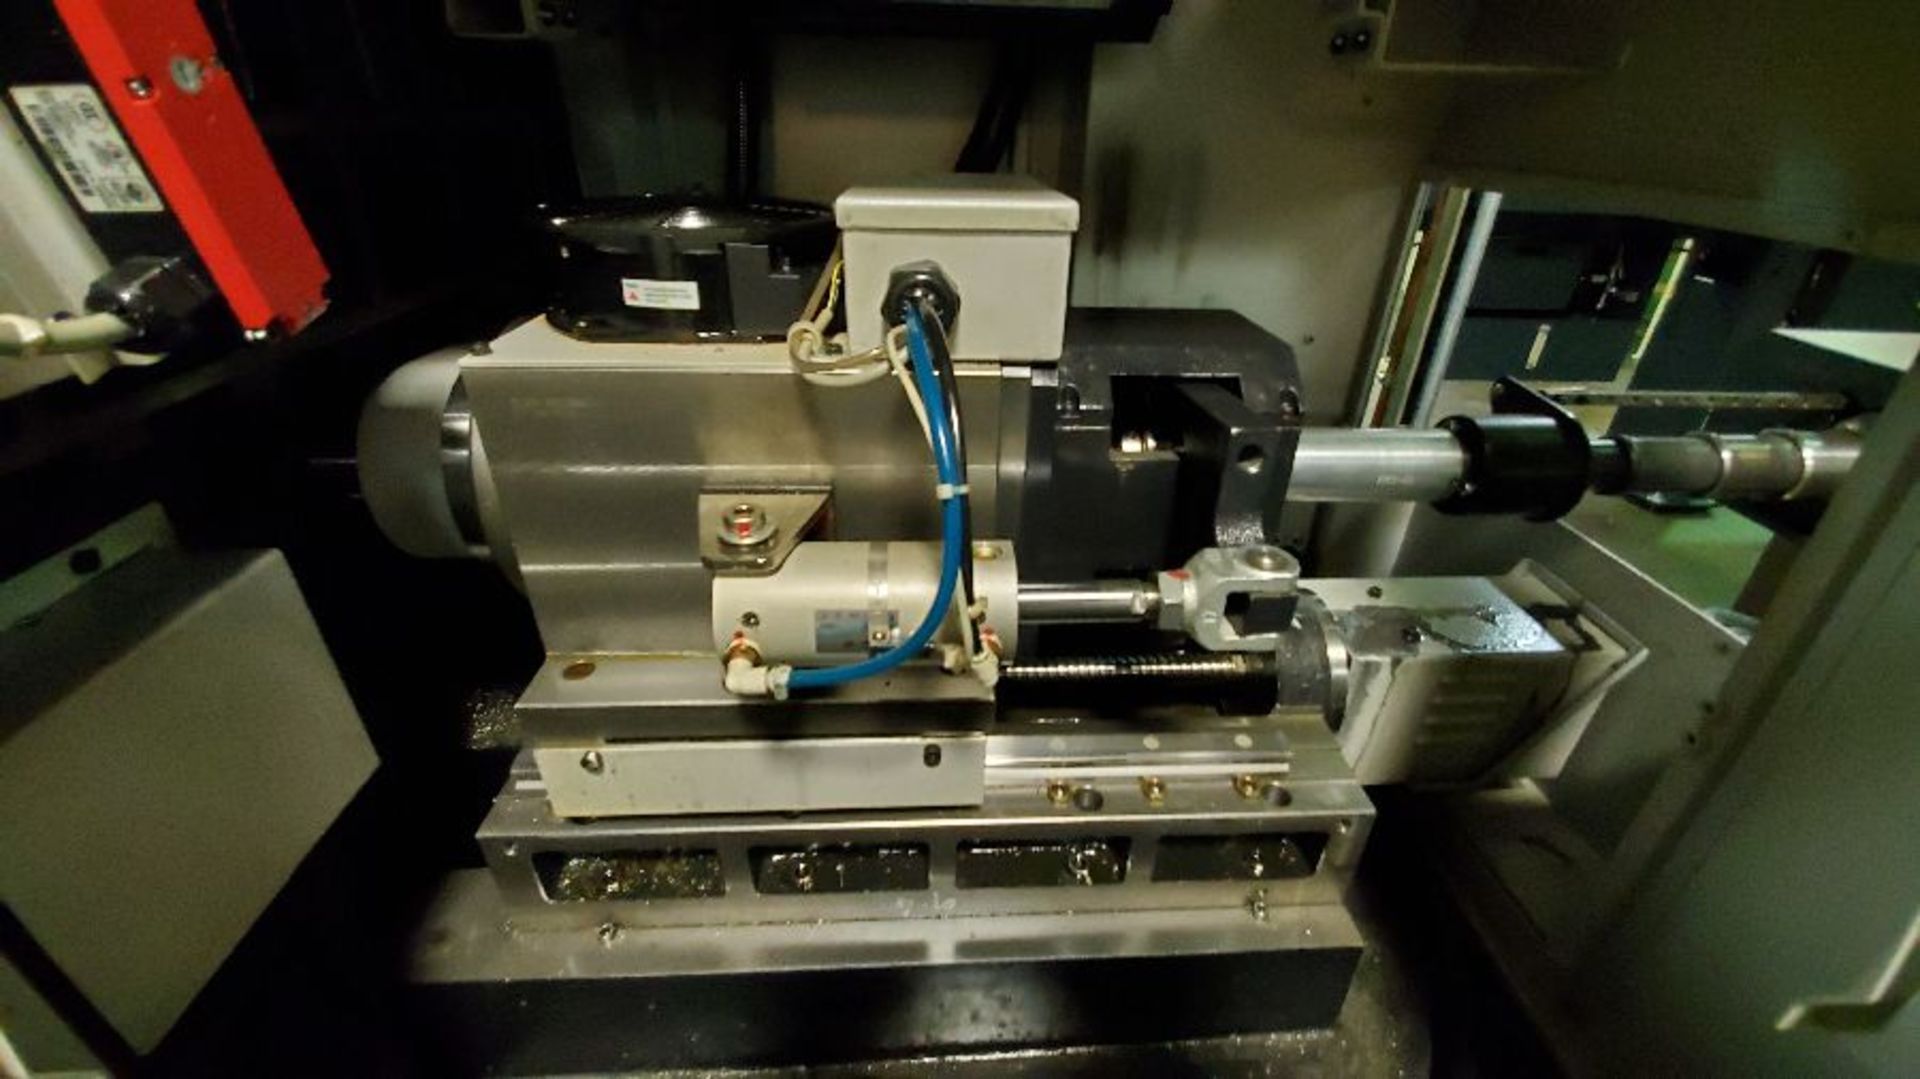 Tornos Model CT 20 7-Axis CNC Swiss-Type Lathe - Image 11 of 25